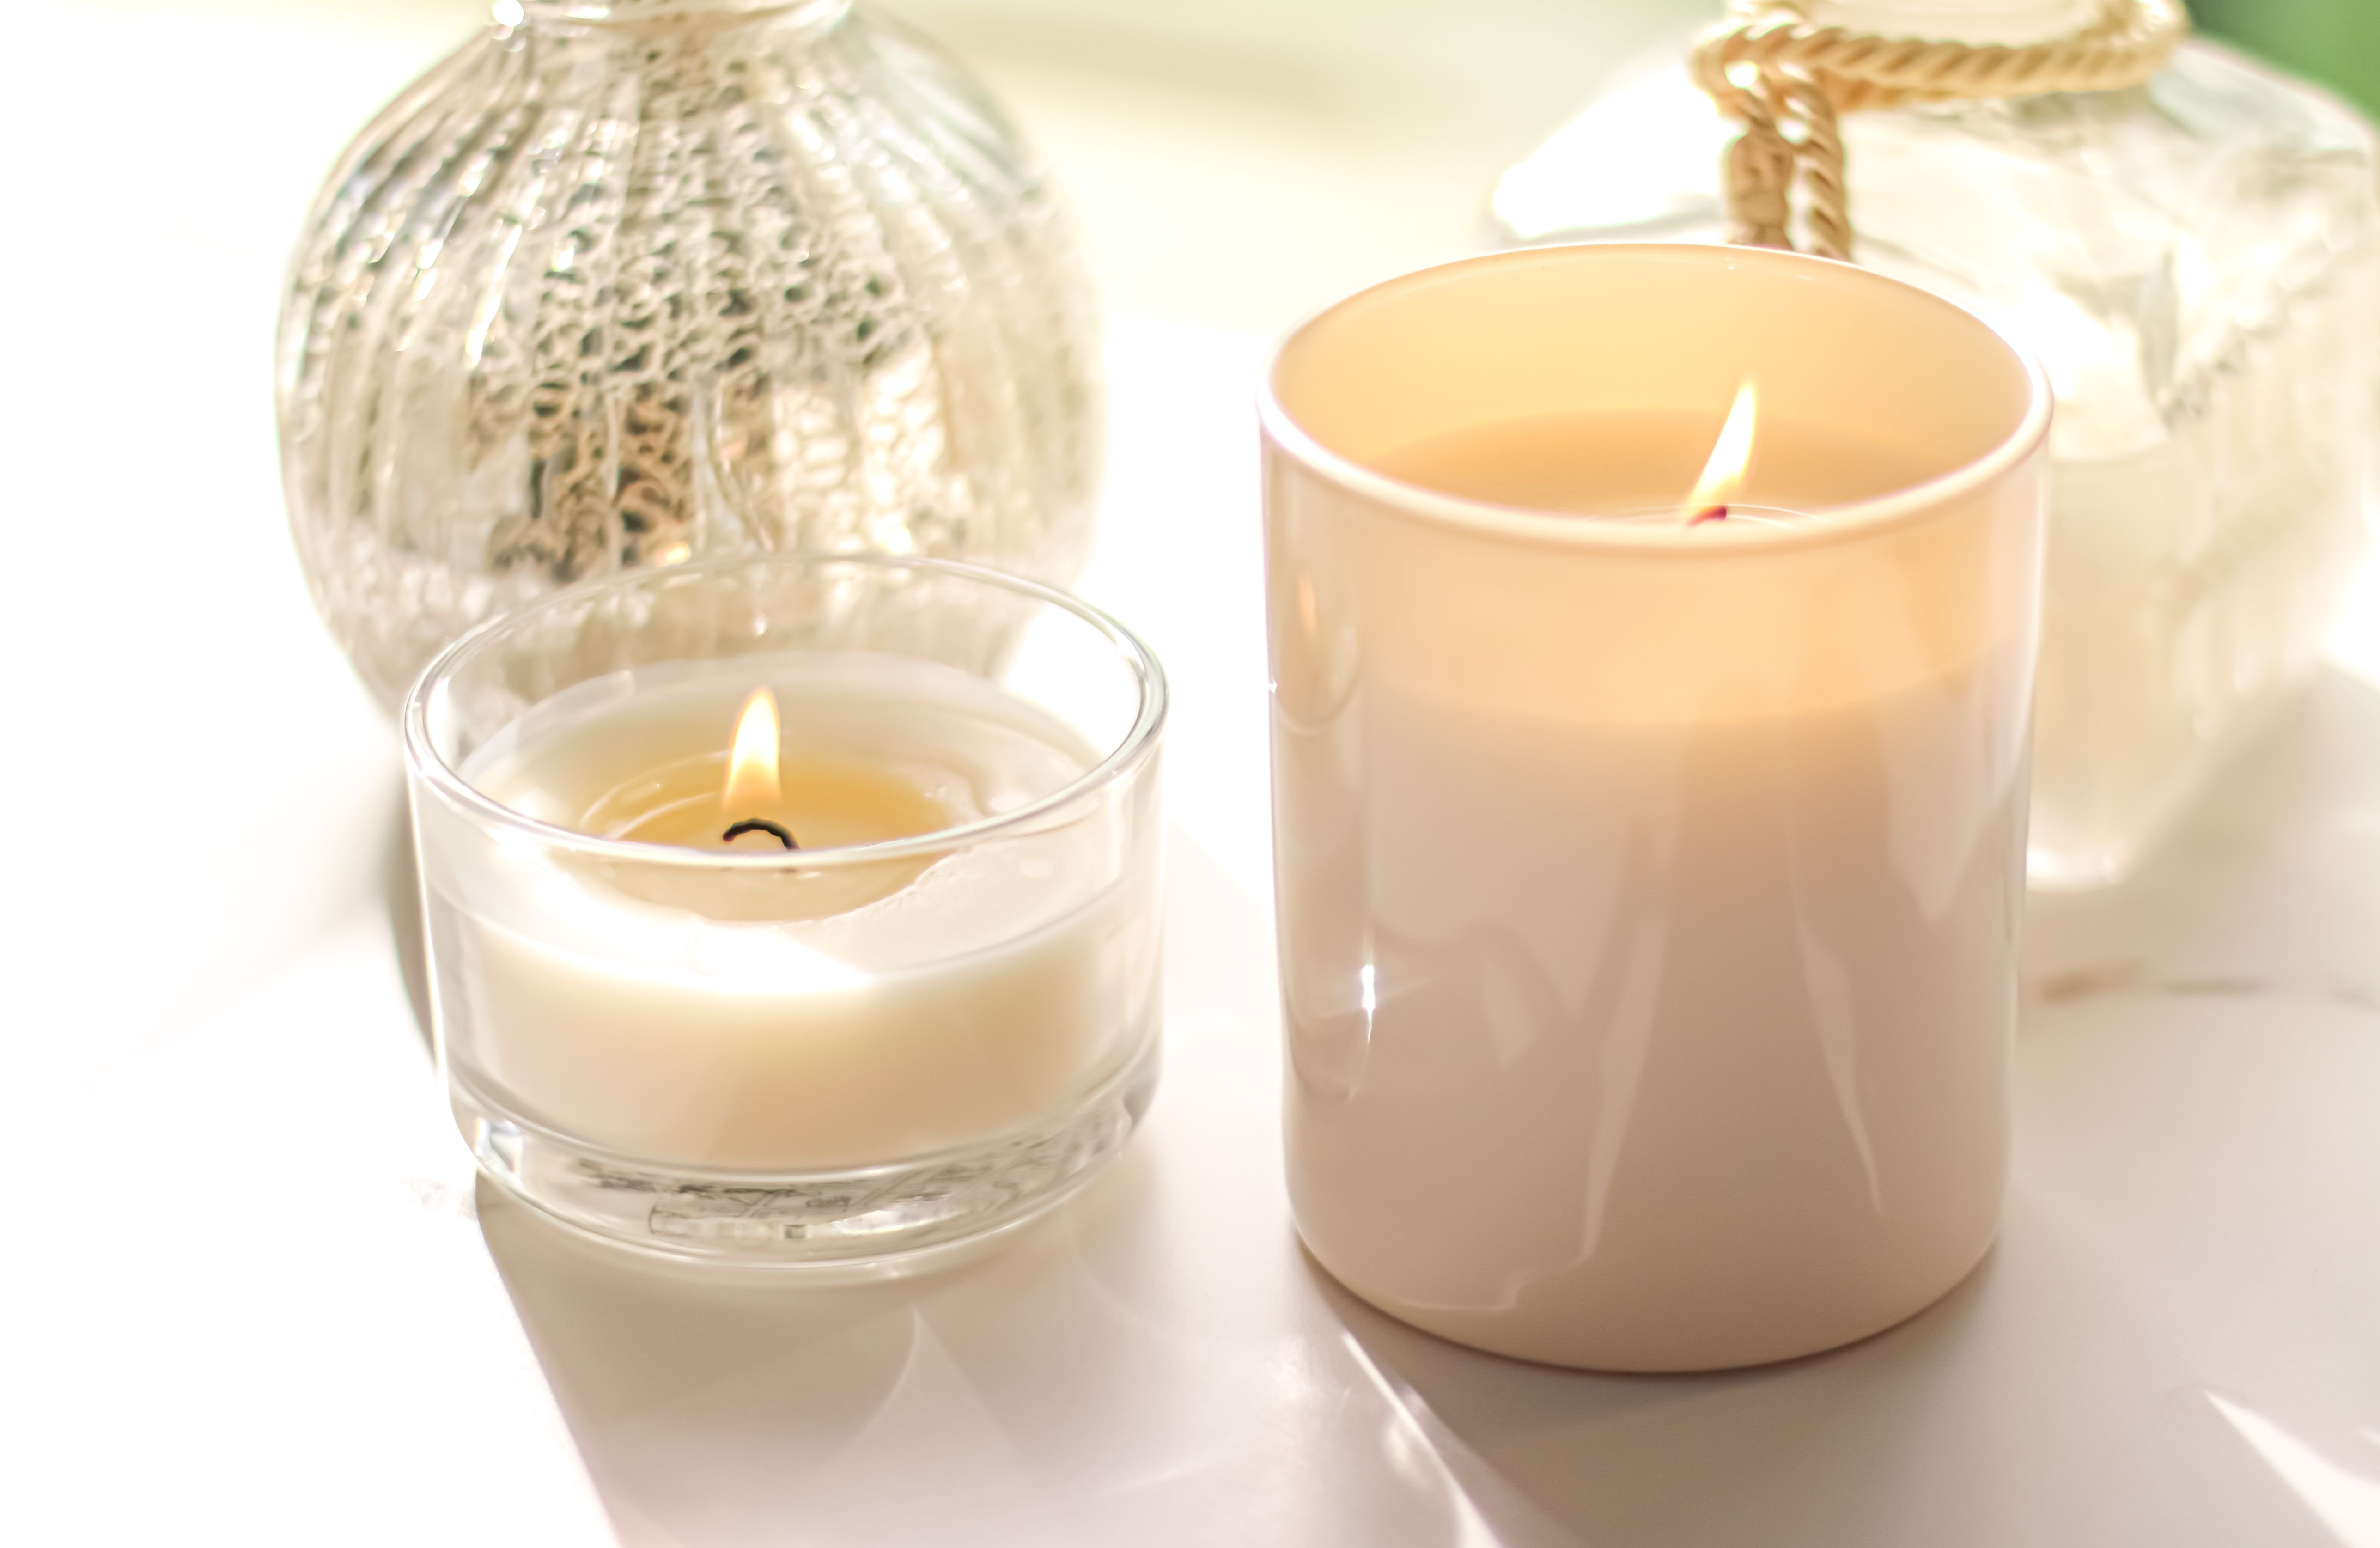 Are Candles Bad for You? Myths and Potential Side Effects